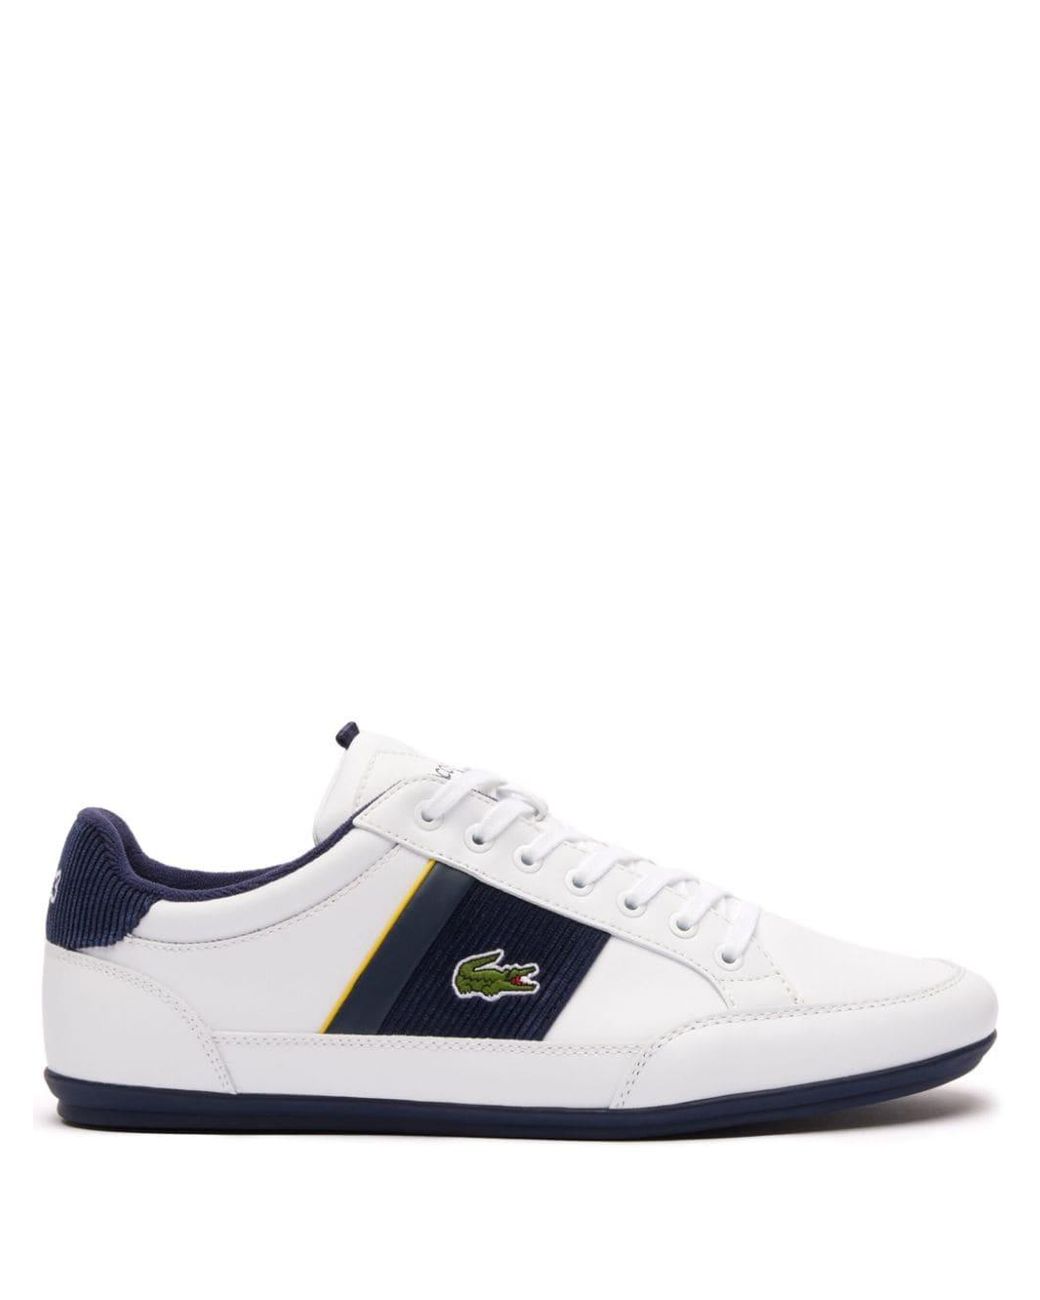 Lacoste Chaymon Corduroy-detail Leather Sneakers in White for Men | Lyst